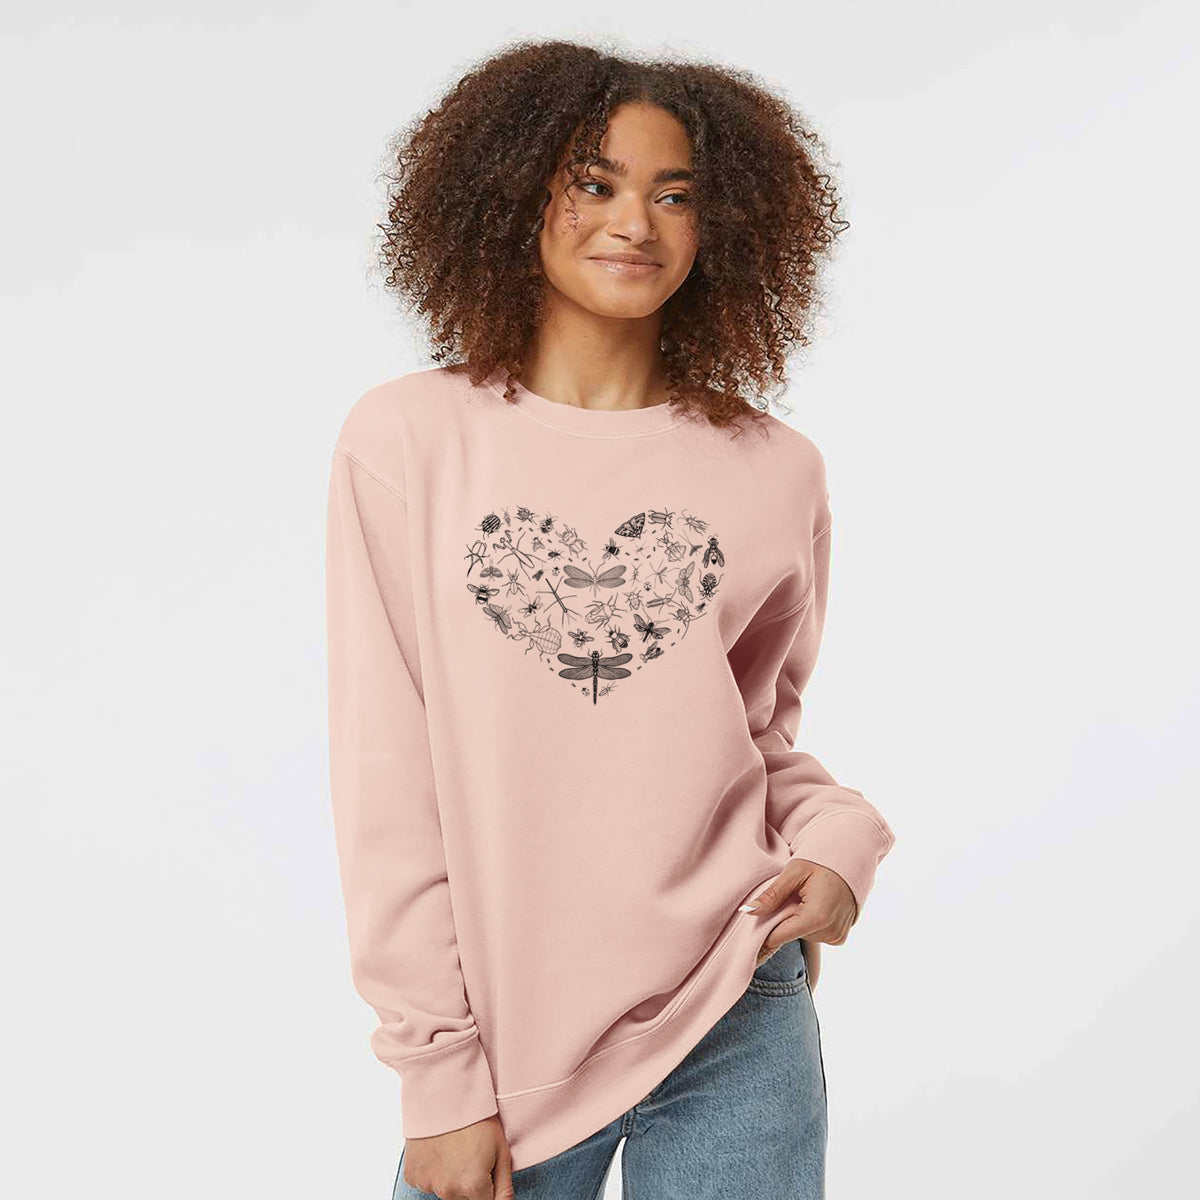 Heart Full of Insects - Unisex Pigment Dyed Crew Sweatshirt